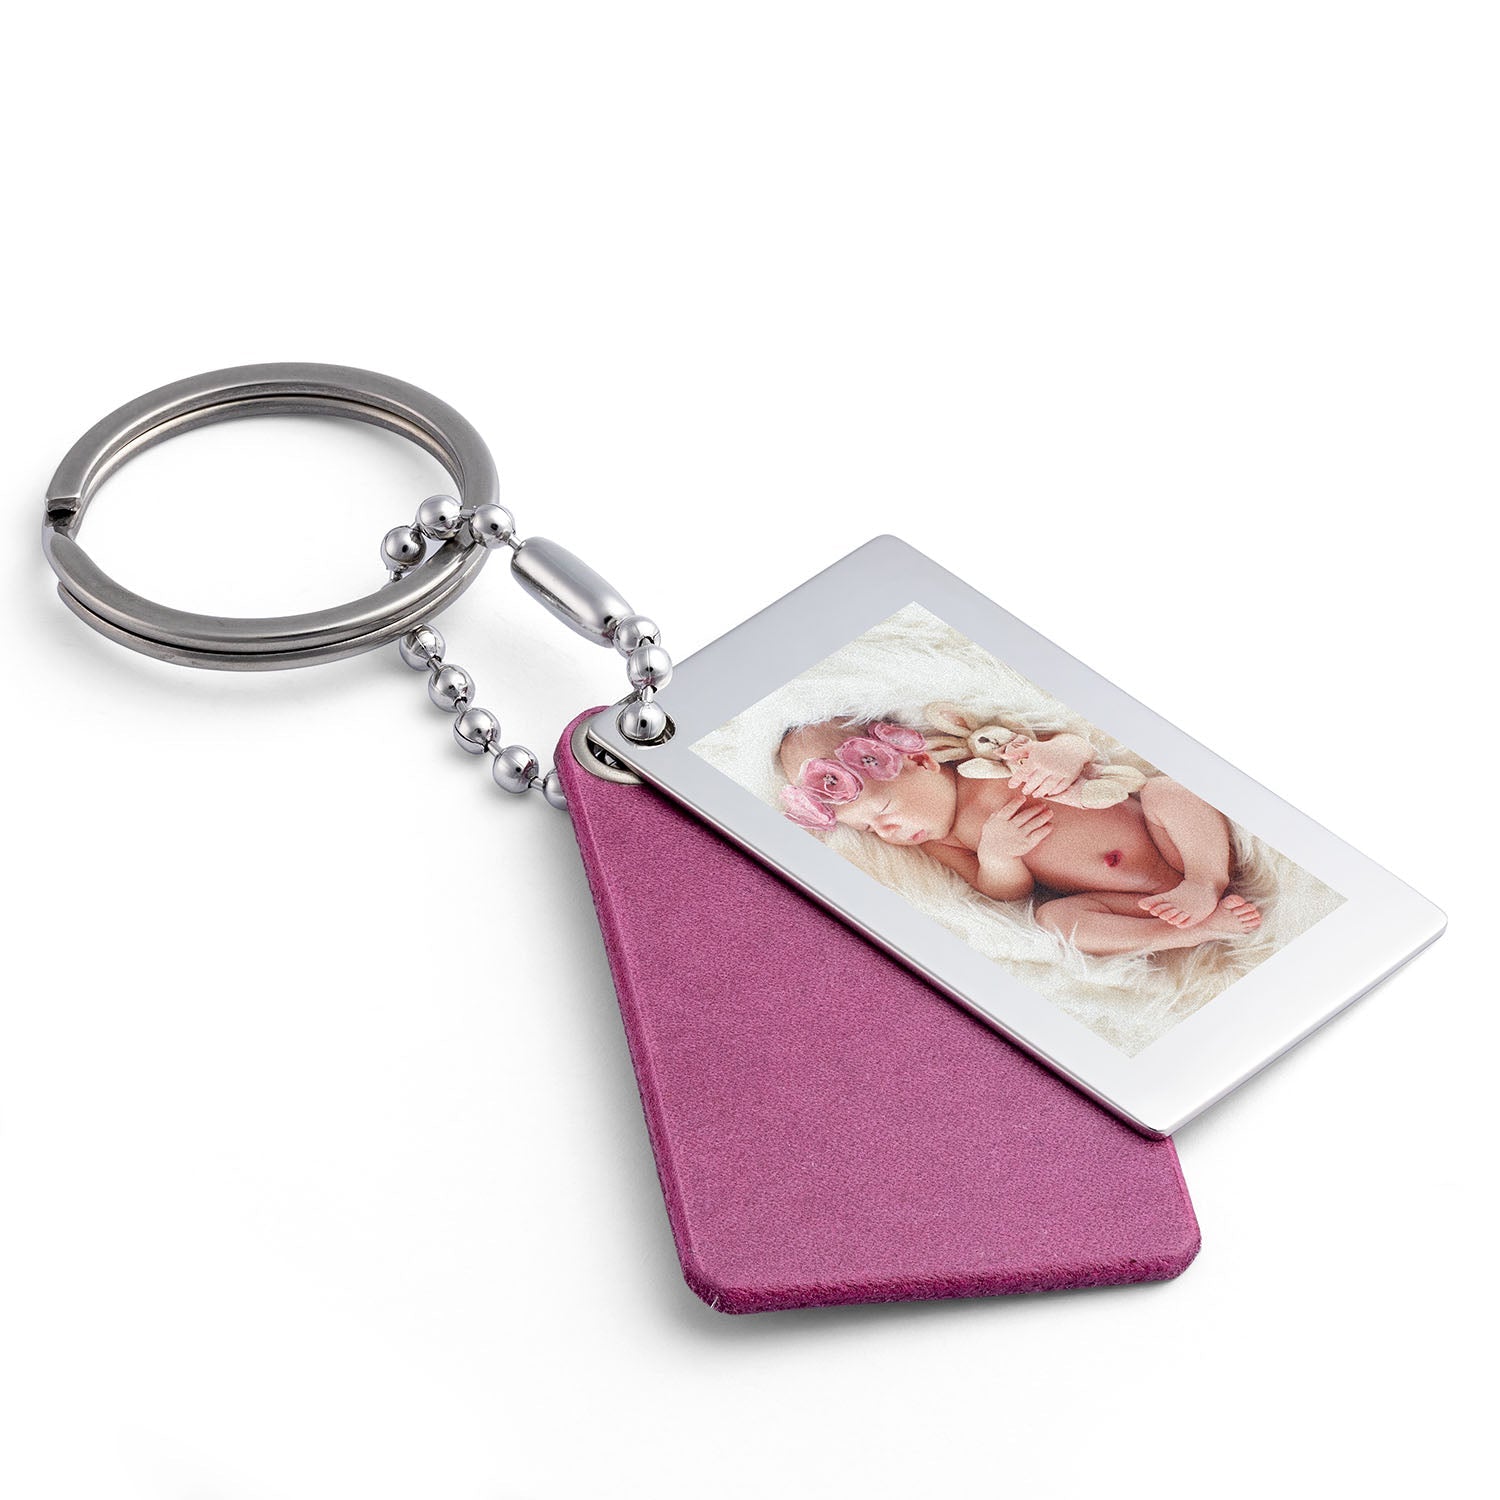 Pink Leather Keyring with Photo and Engraving - seQua.Shop